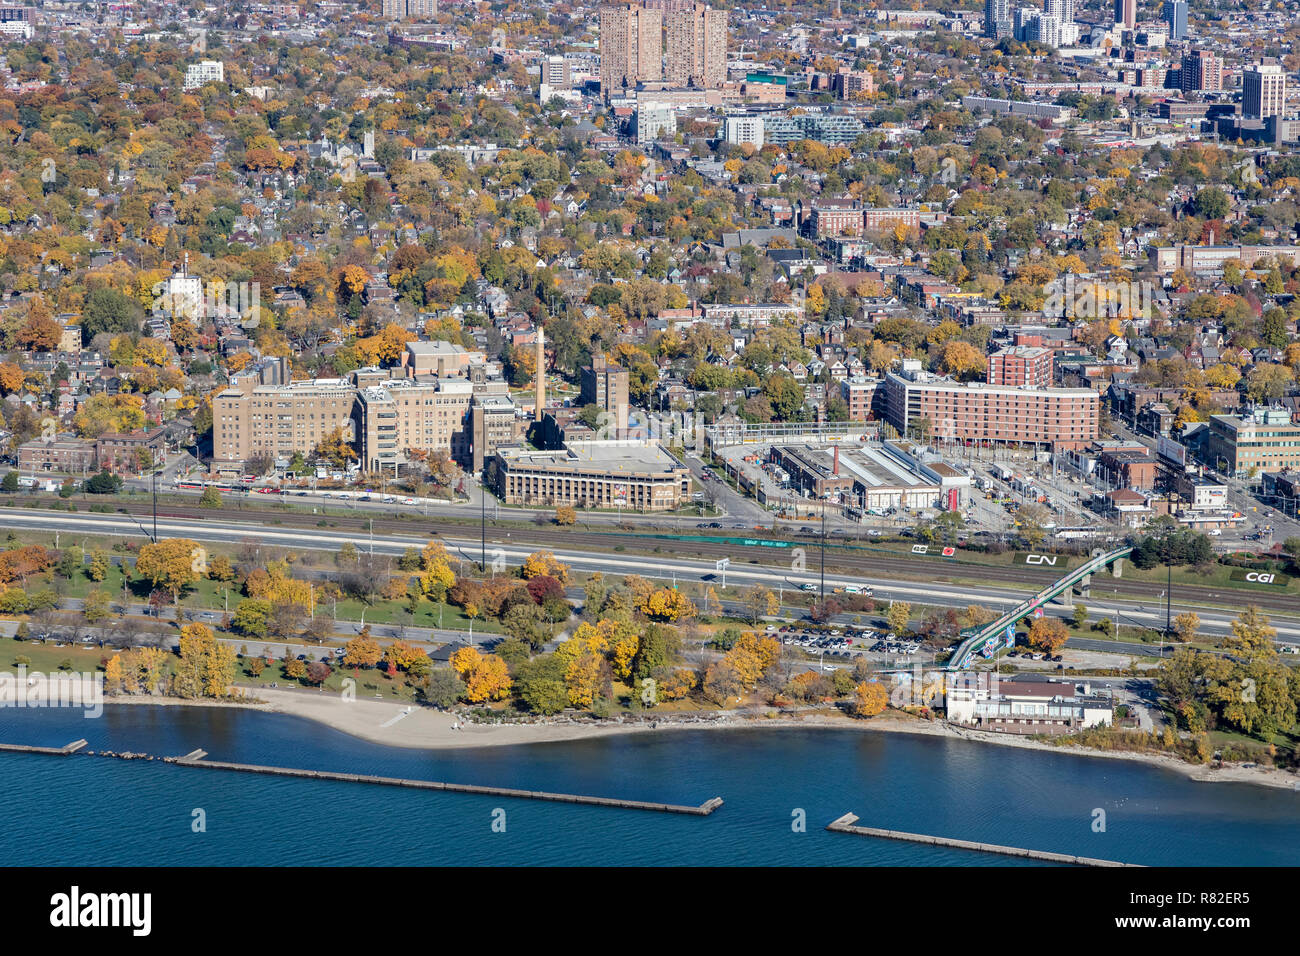 Aerial view of St Josephs Hospital, along the lakeshore in Toronto, Canada. Stock Photo